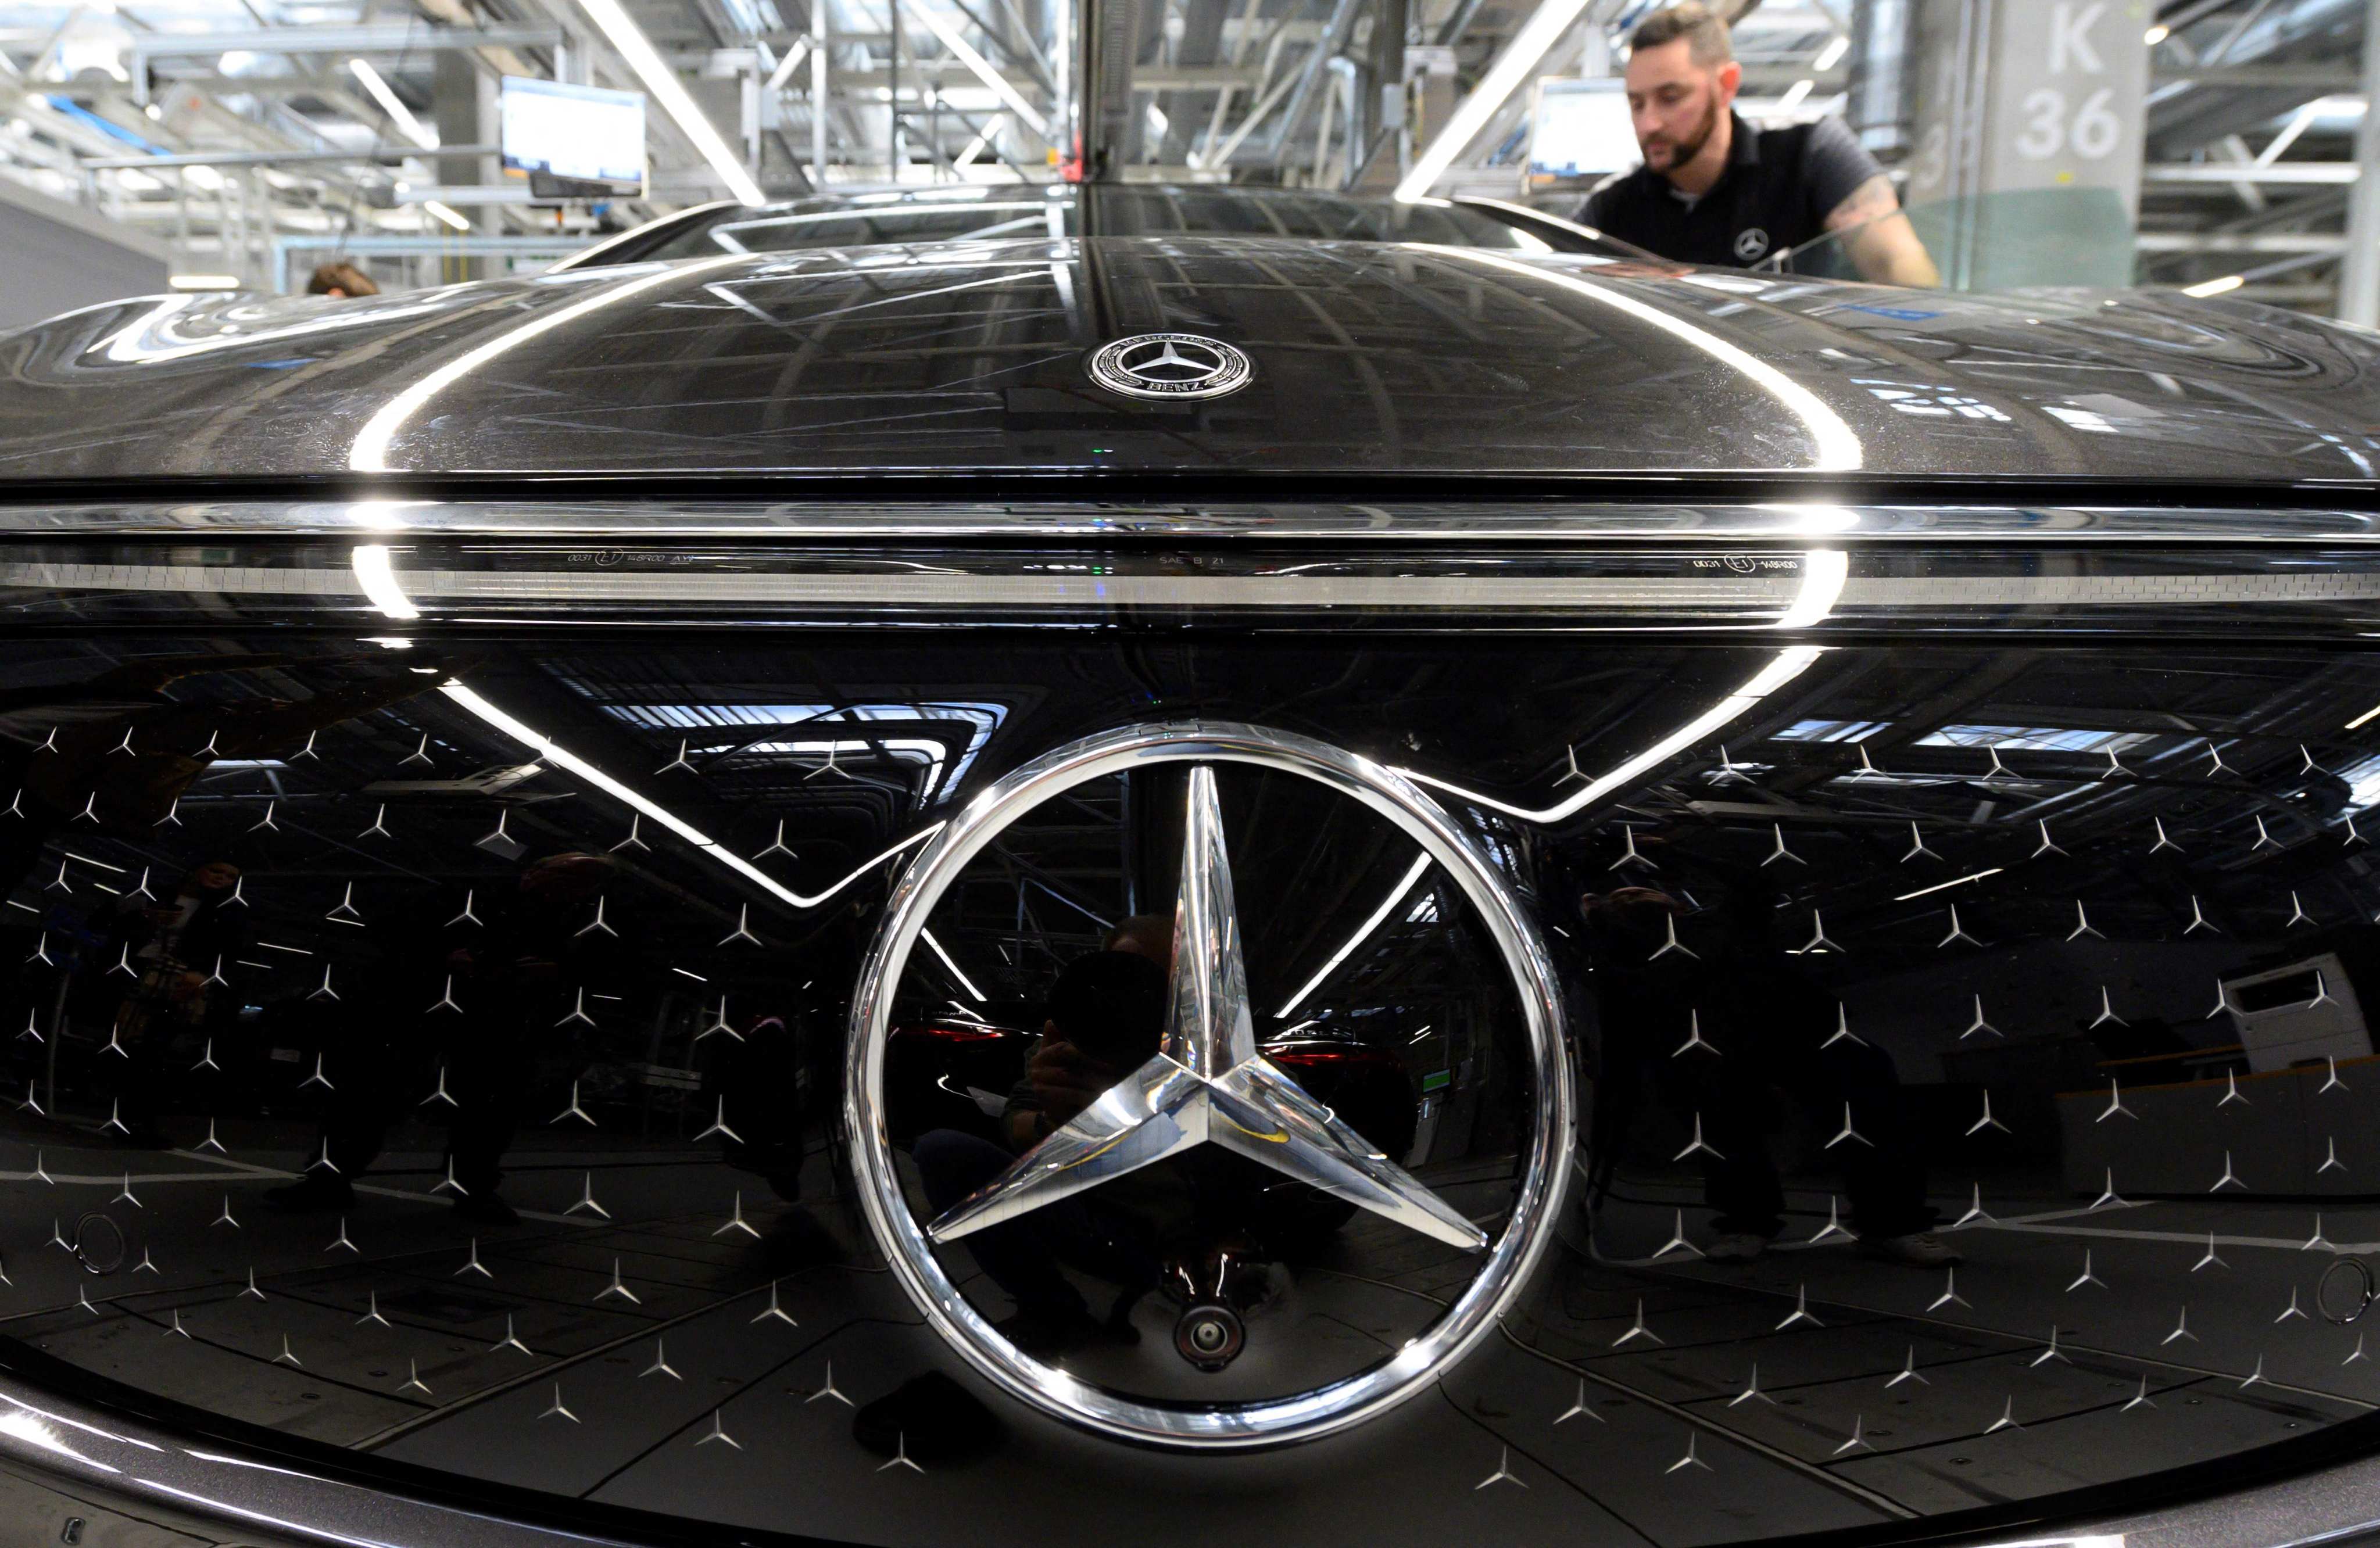 A worker inspects an all-electric EQS passenger car on an assembly line at a Mercedes-Benz manufacturing plant in Germany earlier this year. Photo: AFP